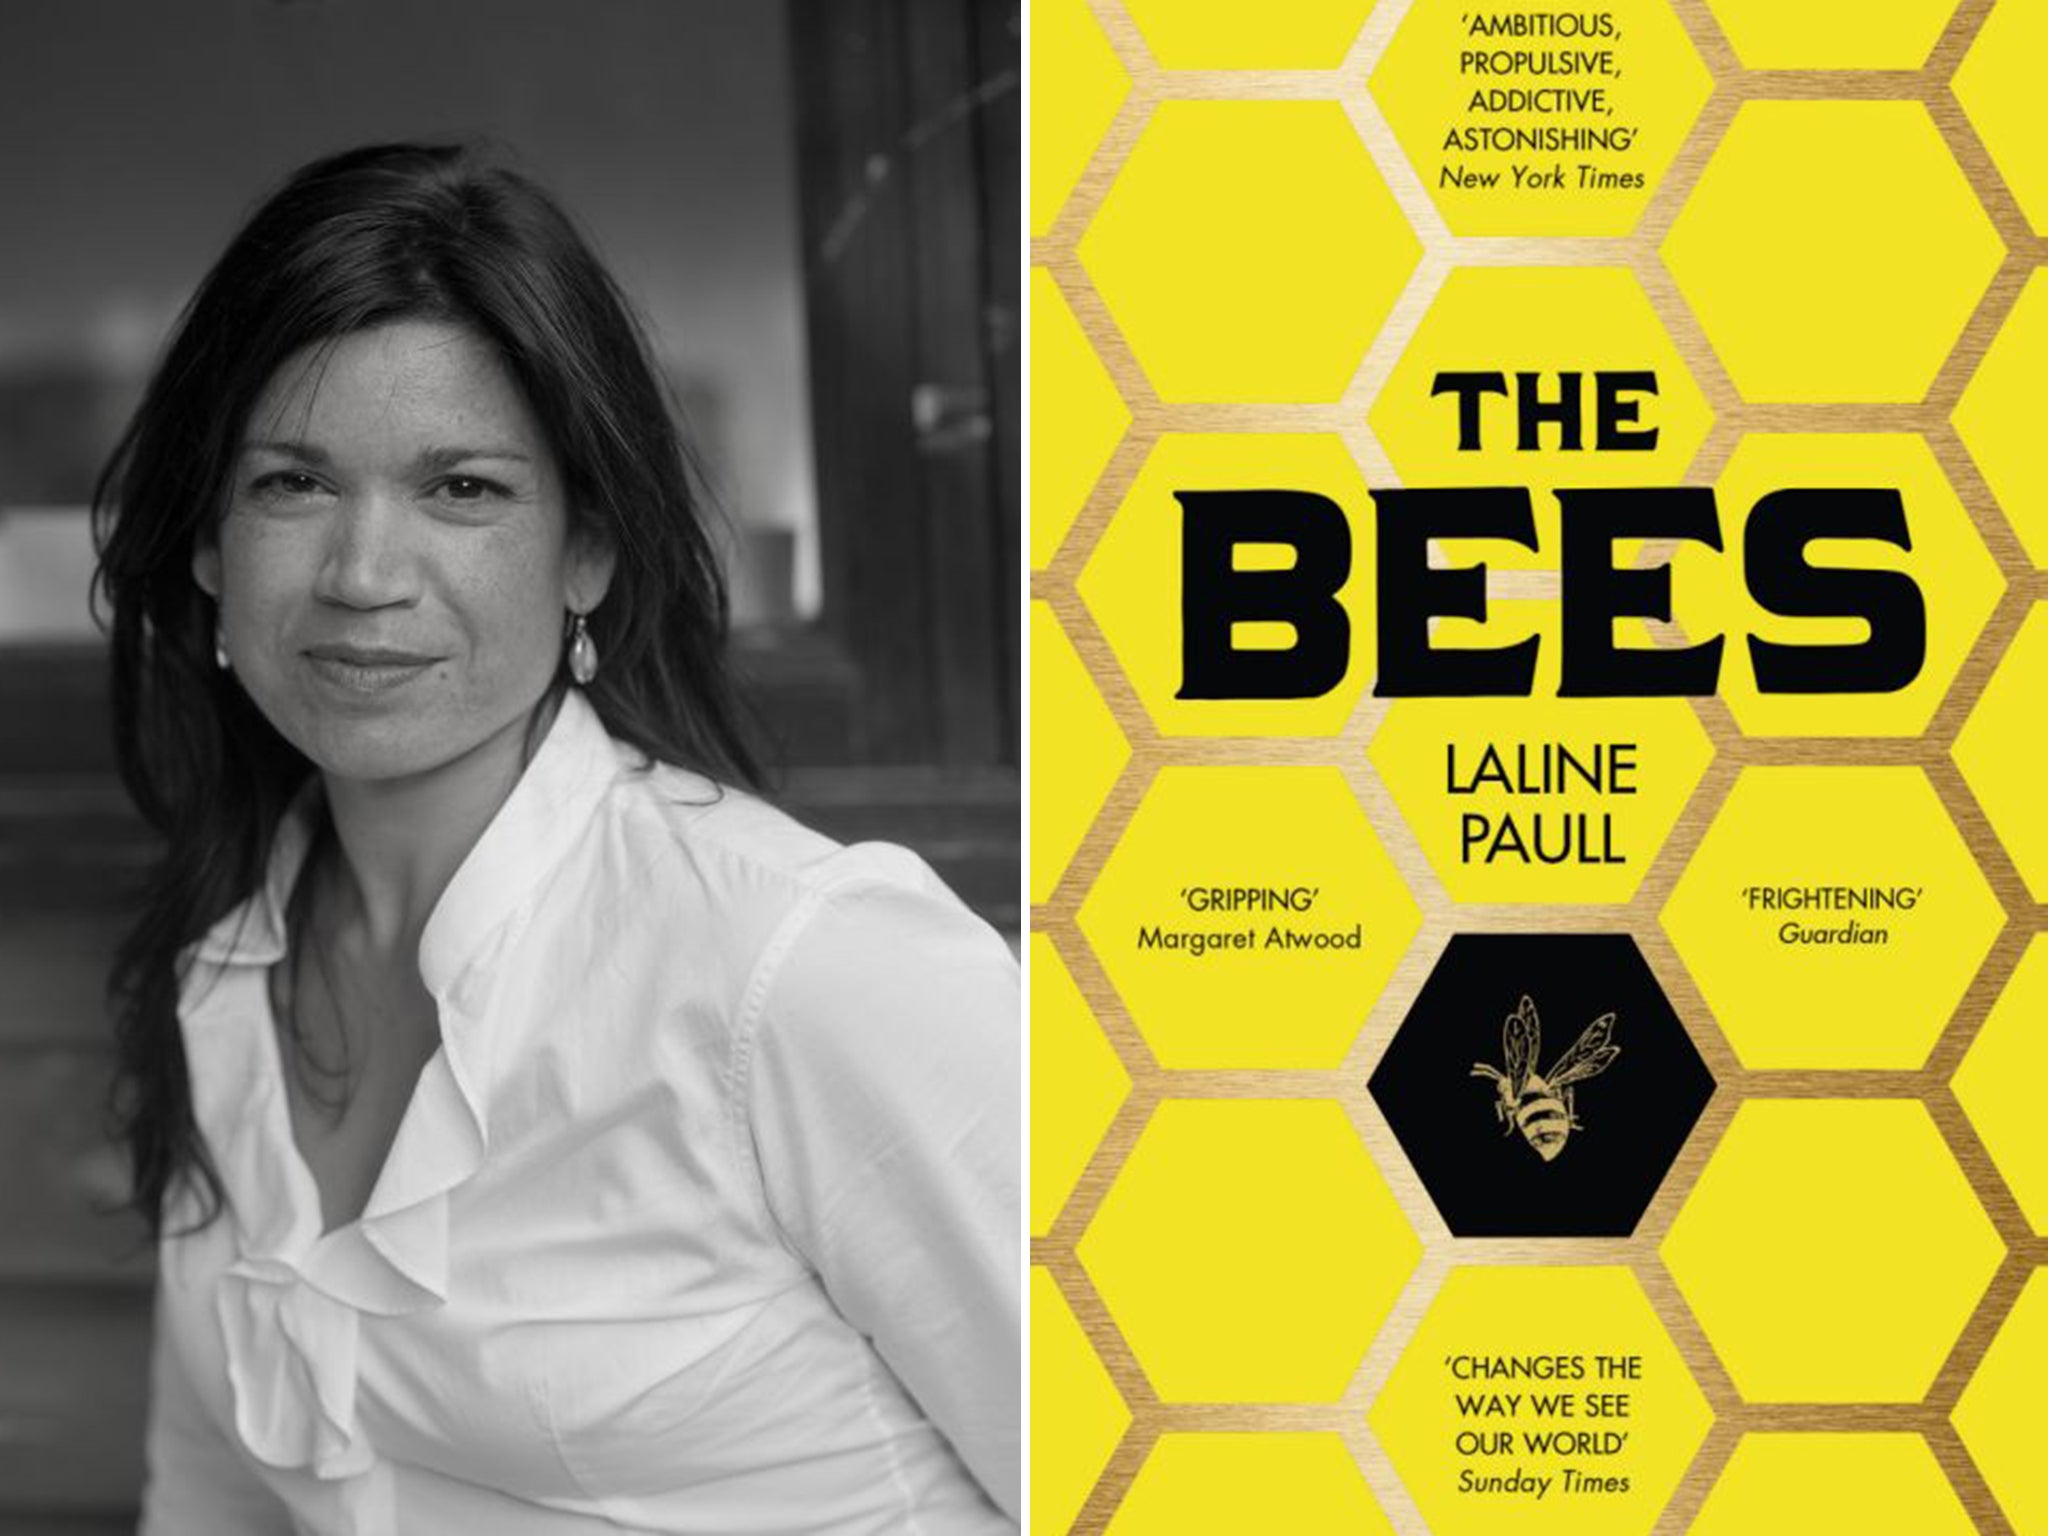 Laline Paull was inspired to write her novel ‘The Bees’ by the death from breast cancer of a close friend who kept bees